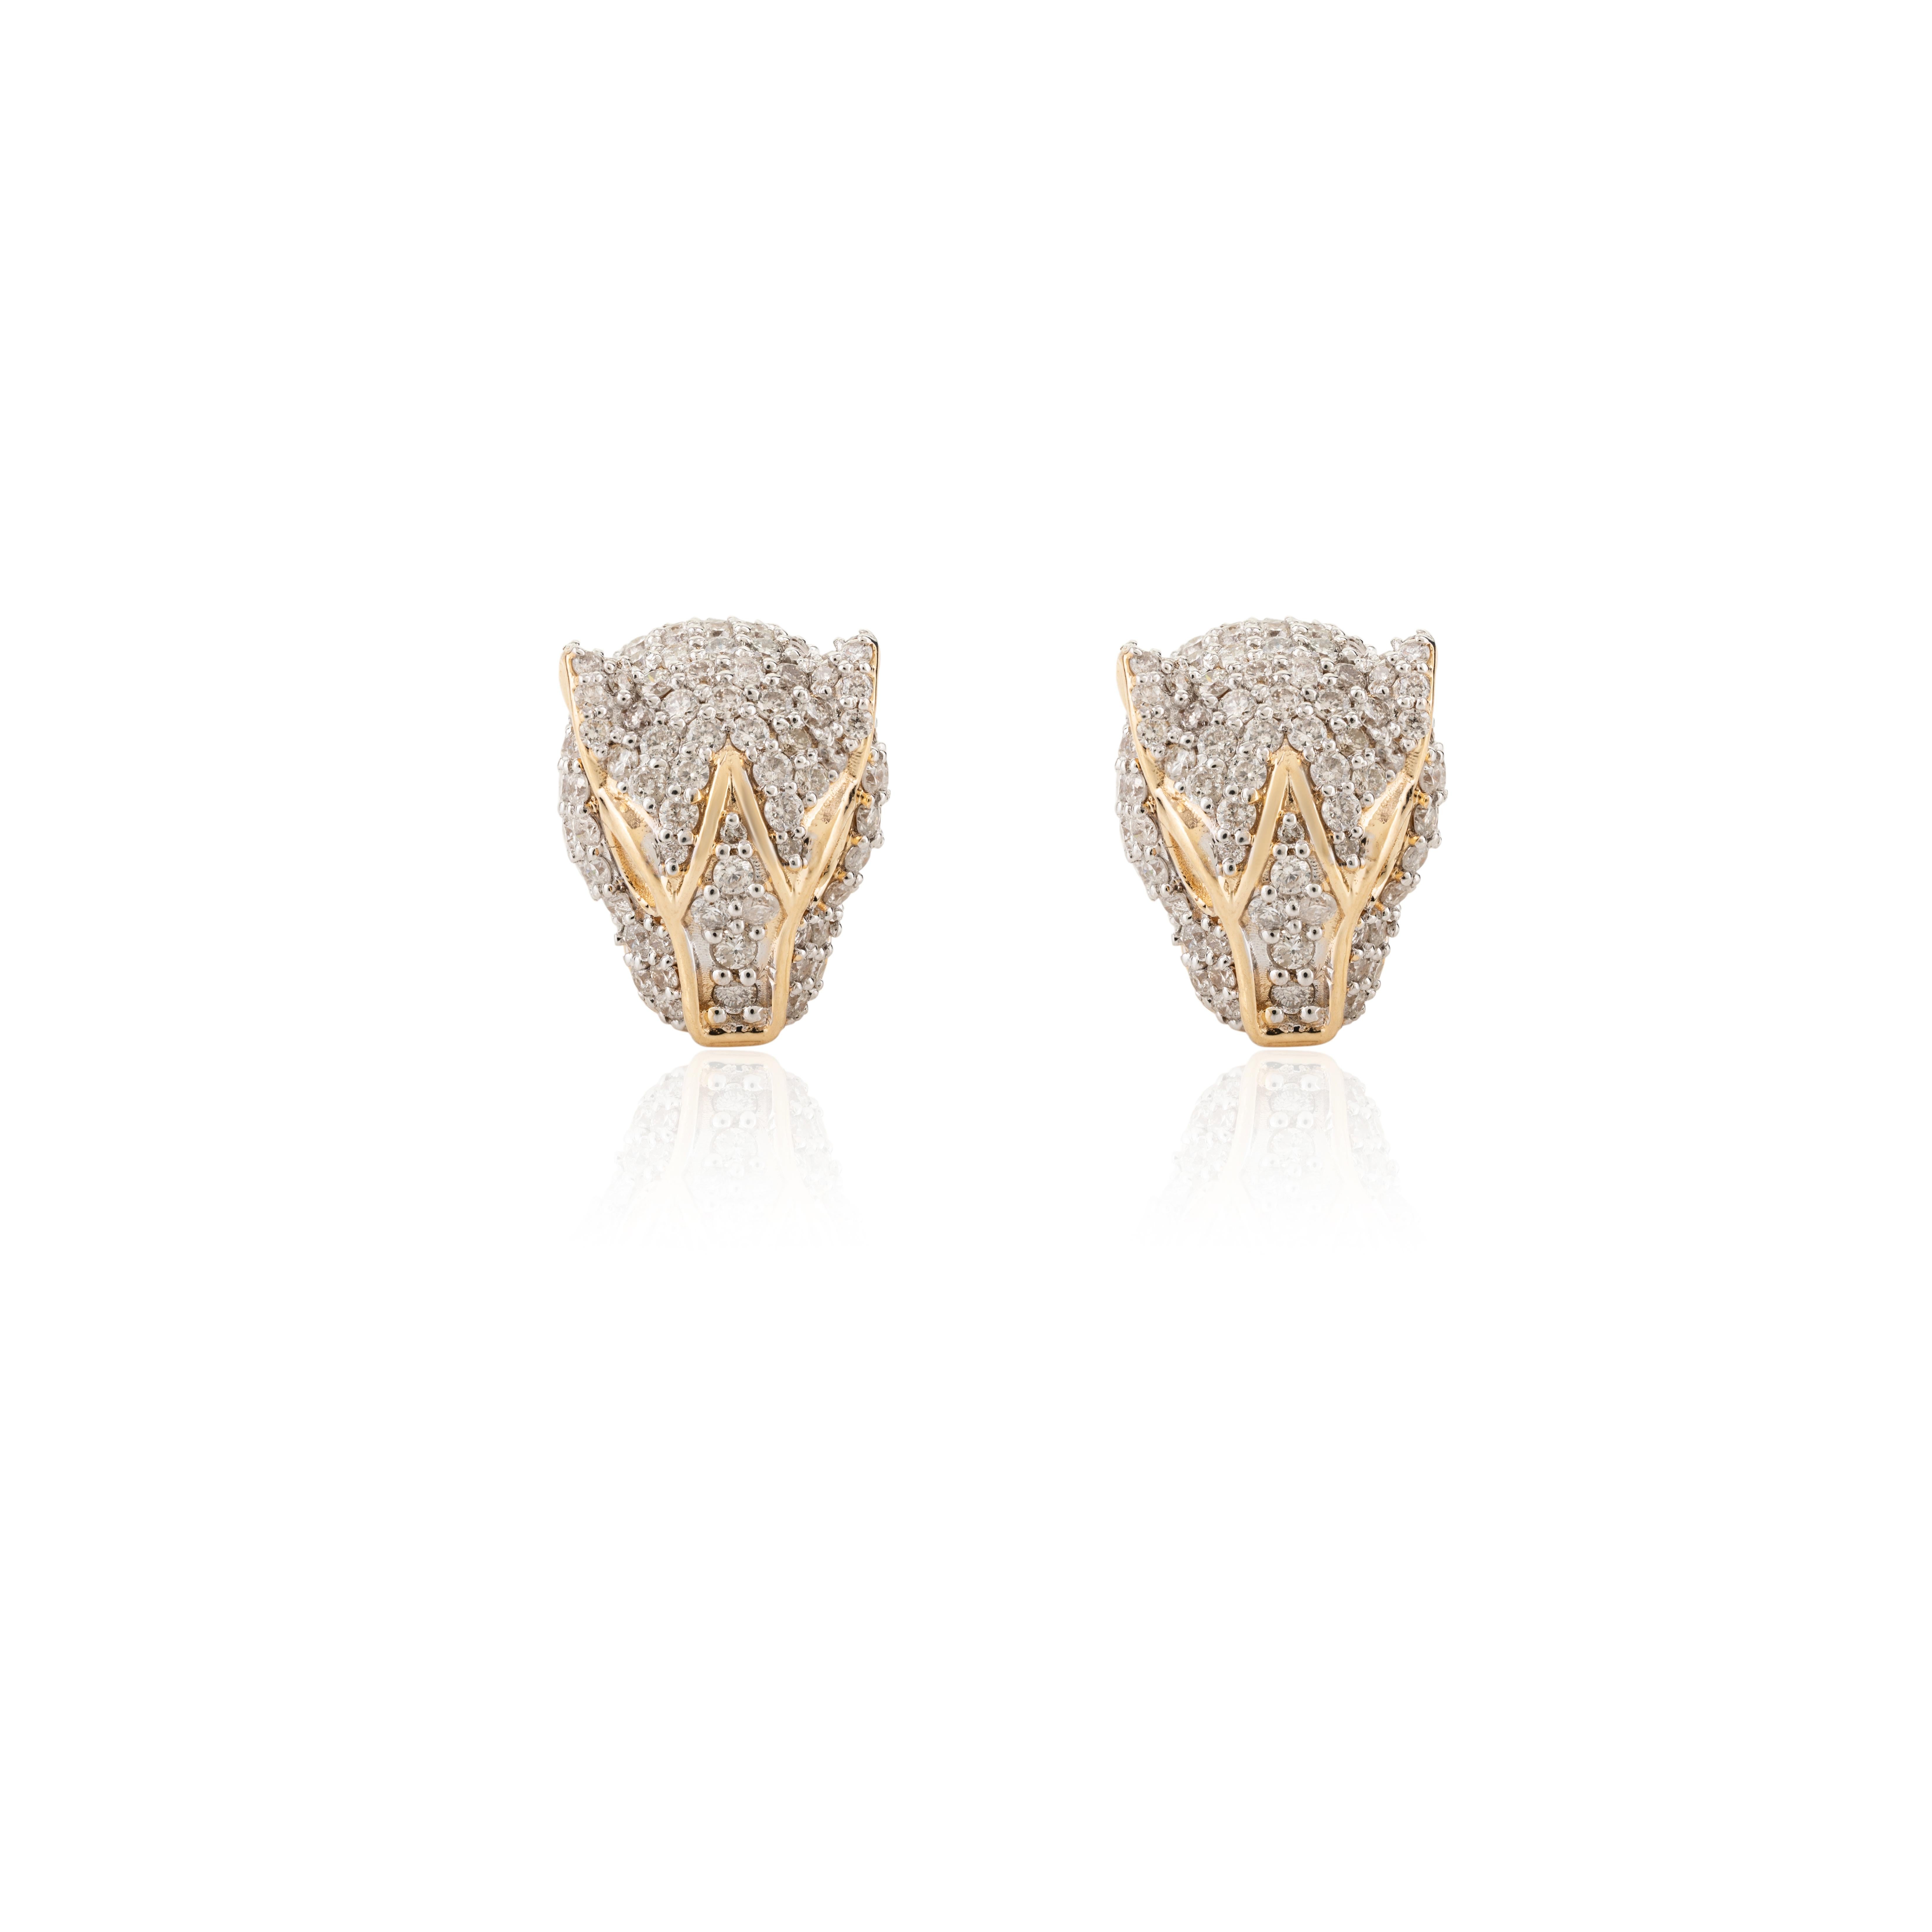 Contemporary 18 Karat Yellow Gold Distinctive 1.93 CTW Diamond Panther Stud Earrings For Sale